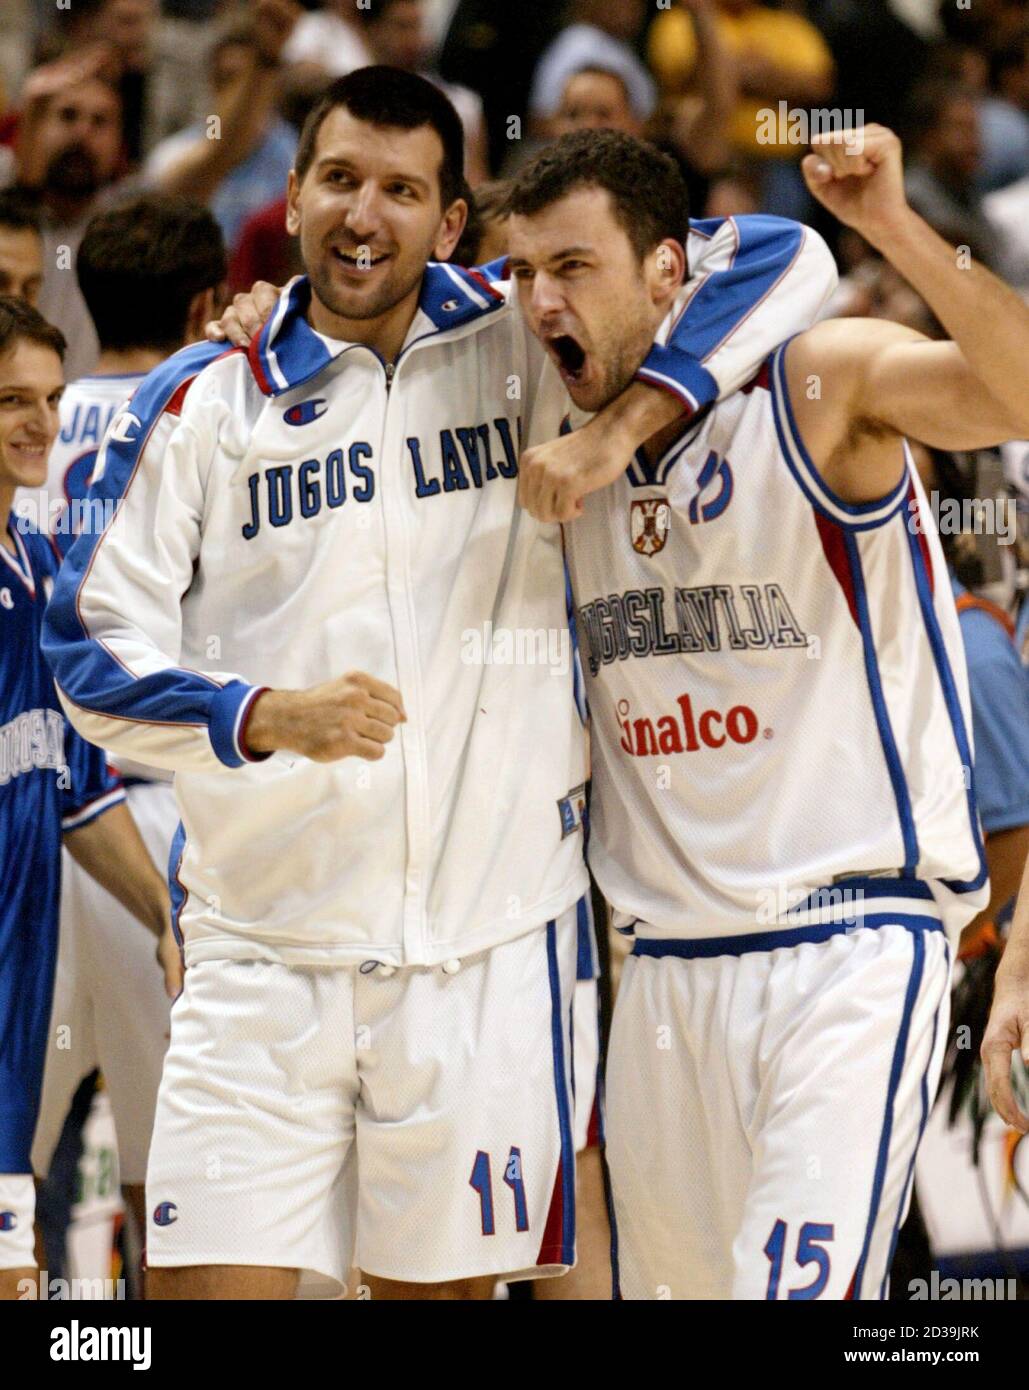 Yugoslavia's Predrag Drobnjak (L) and teammate Milan Gurovic celebrate  after they defeated the United States 81-78 during the quarter-final round  of the 2002 World Basketball Championships in Indianapolis, Indiana,  September 5, 2002.